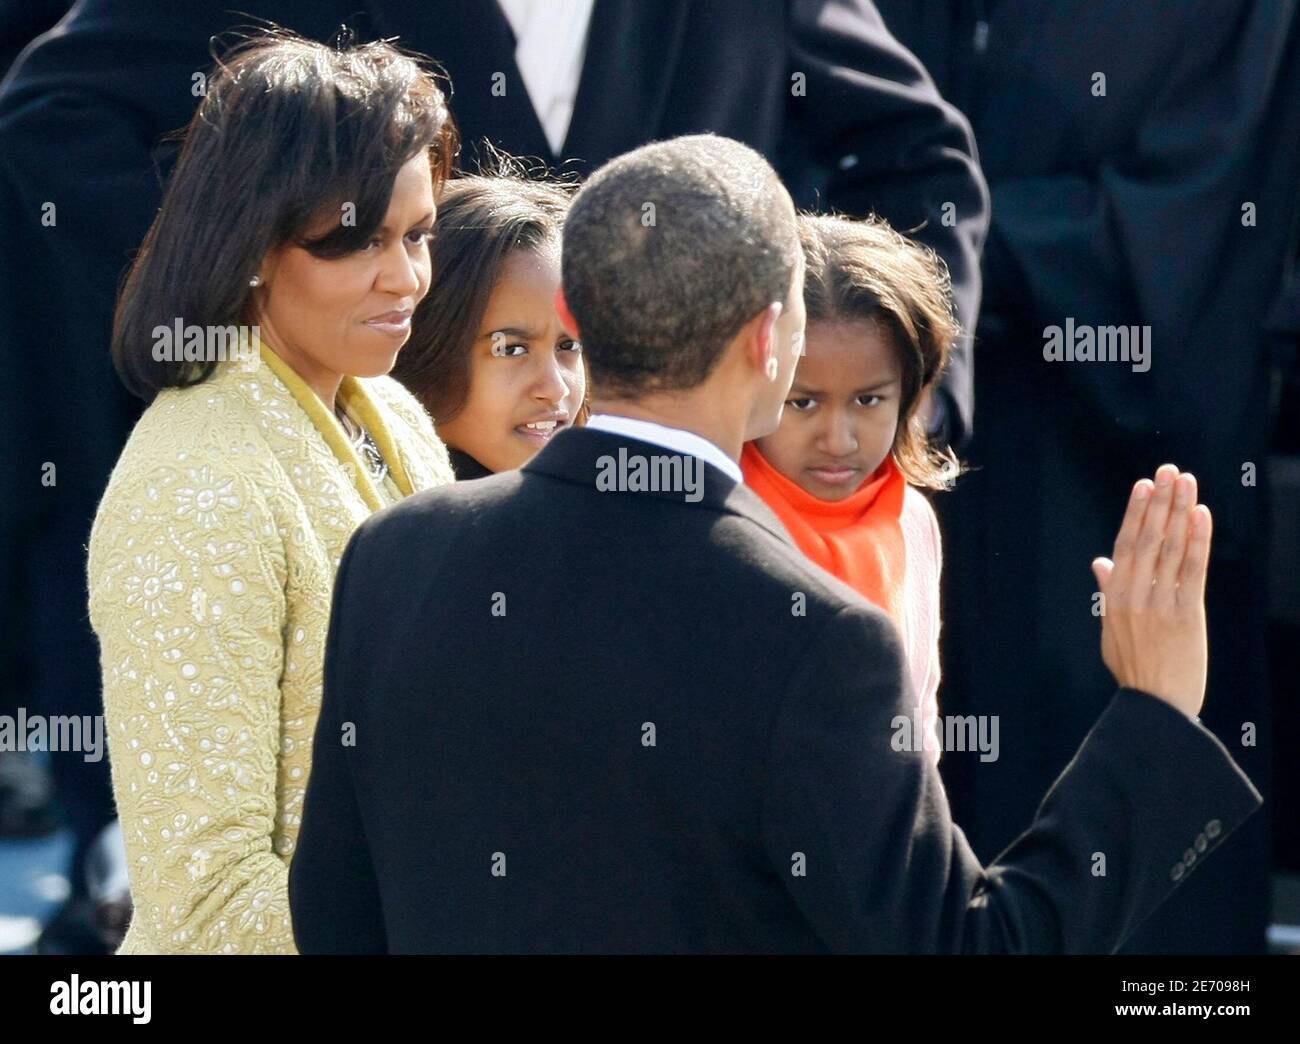 Barack Obama is accompanied by his wife Michelle and daughters Malia and Sasha while he takes the Oath of Office as the 44th President of the United States in Washington, January 20, 2009. Obama became the first African-American president in U.S. history.     REUTERS/Rick Wilking (UNITED STATES) Stock Photo